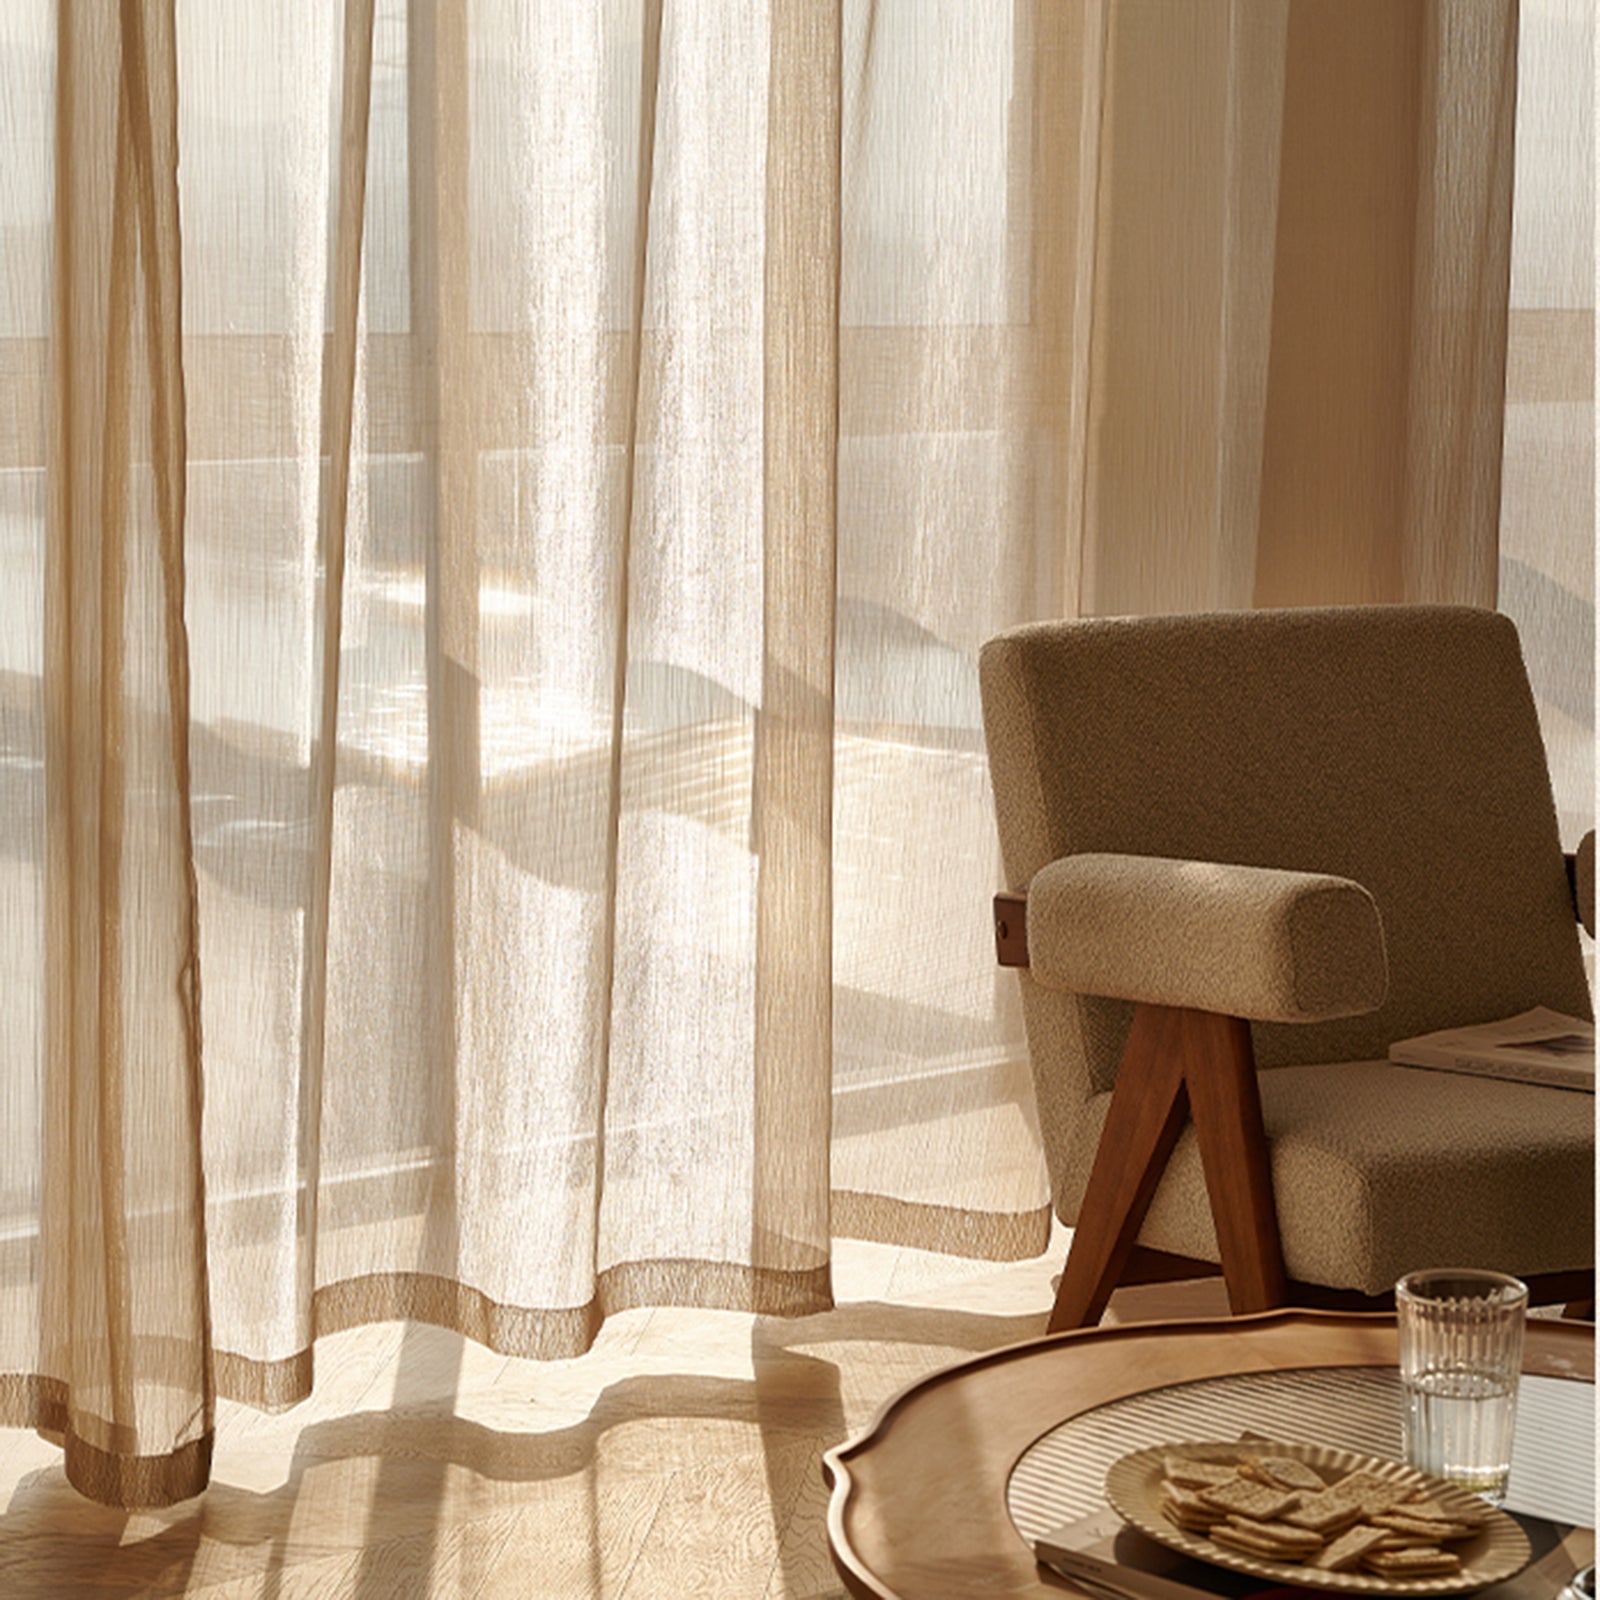 French Weaving Translucent Sheer Curtain, Glod/Coffee/Black/White